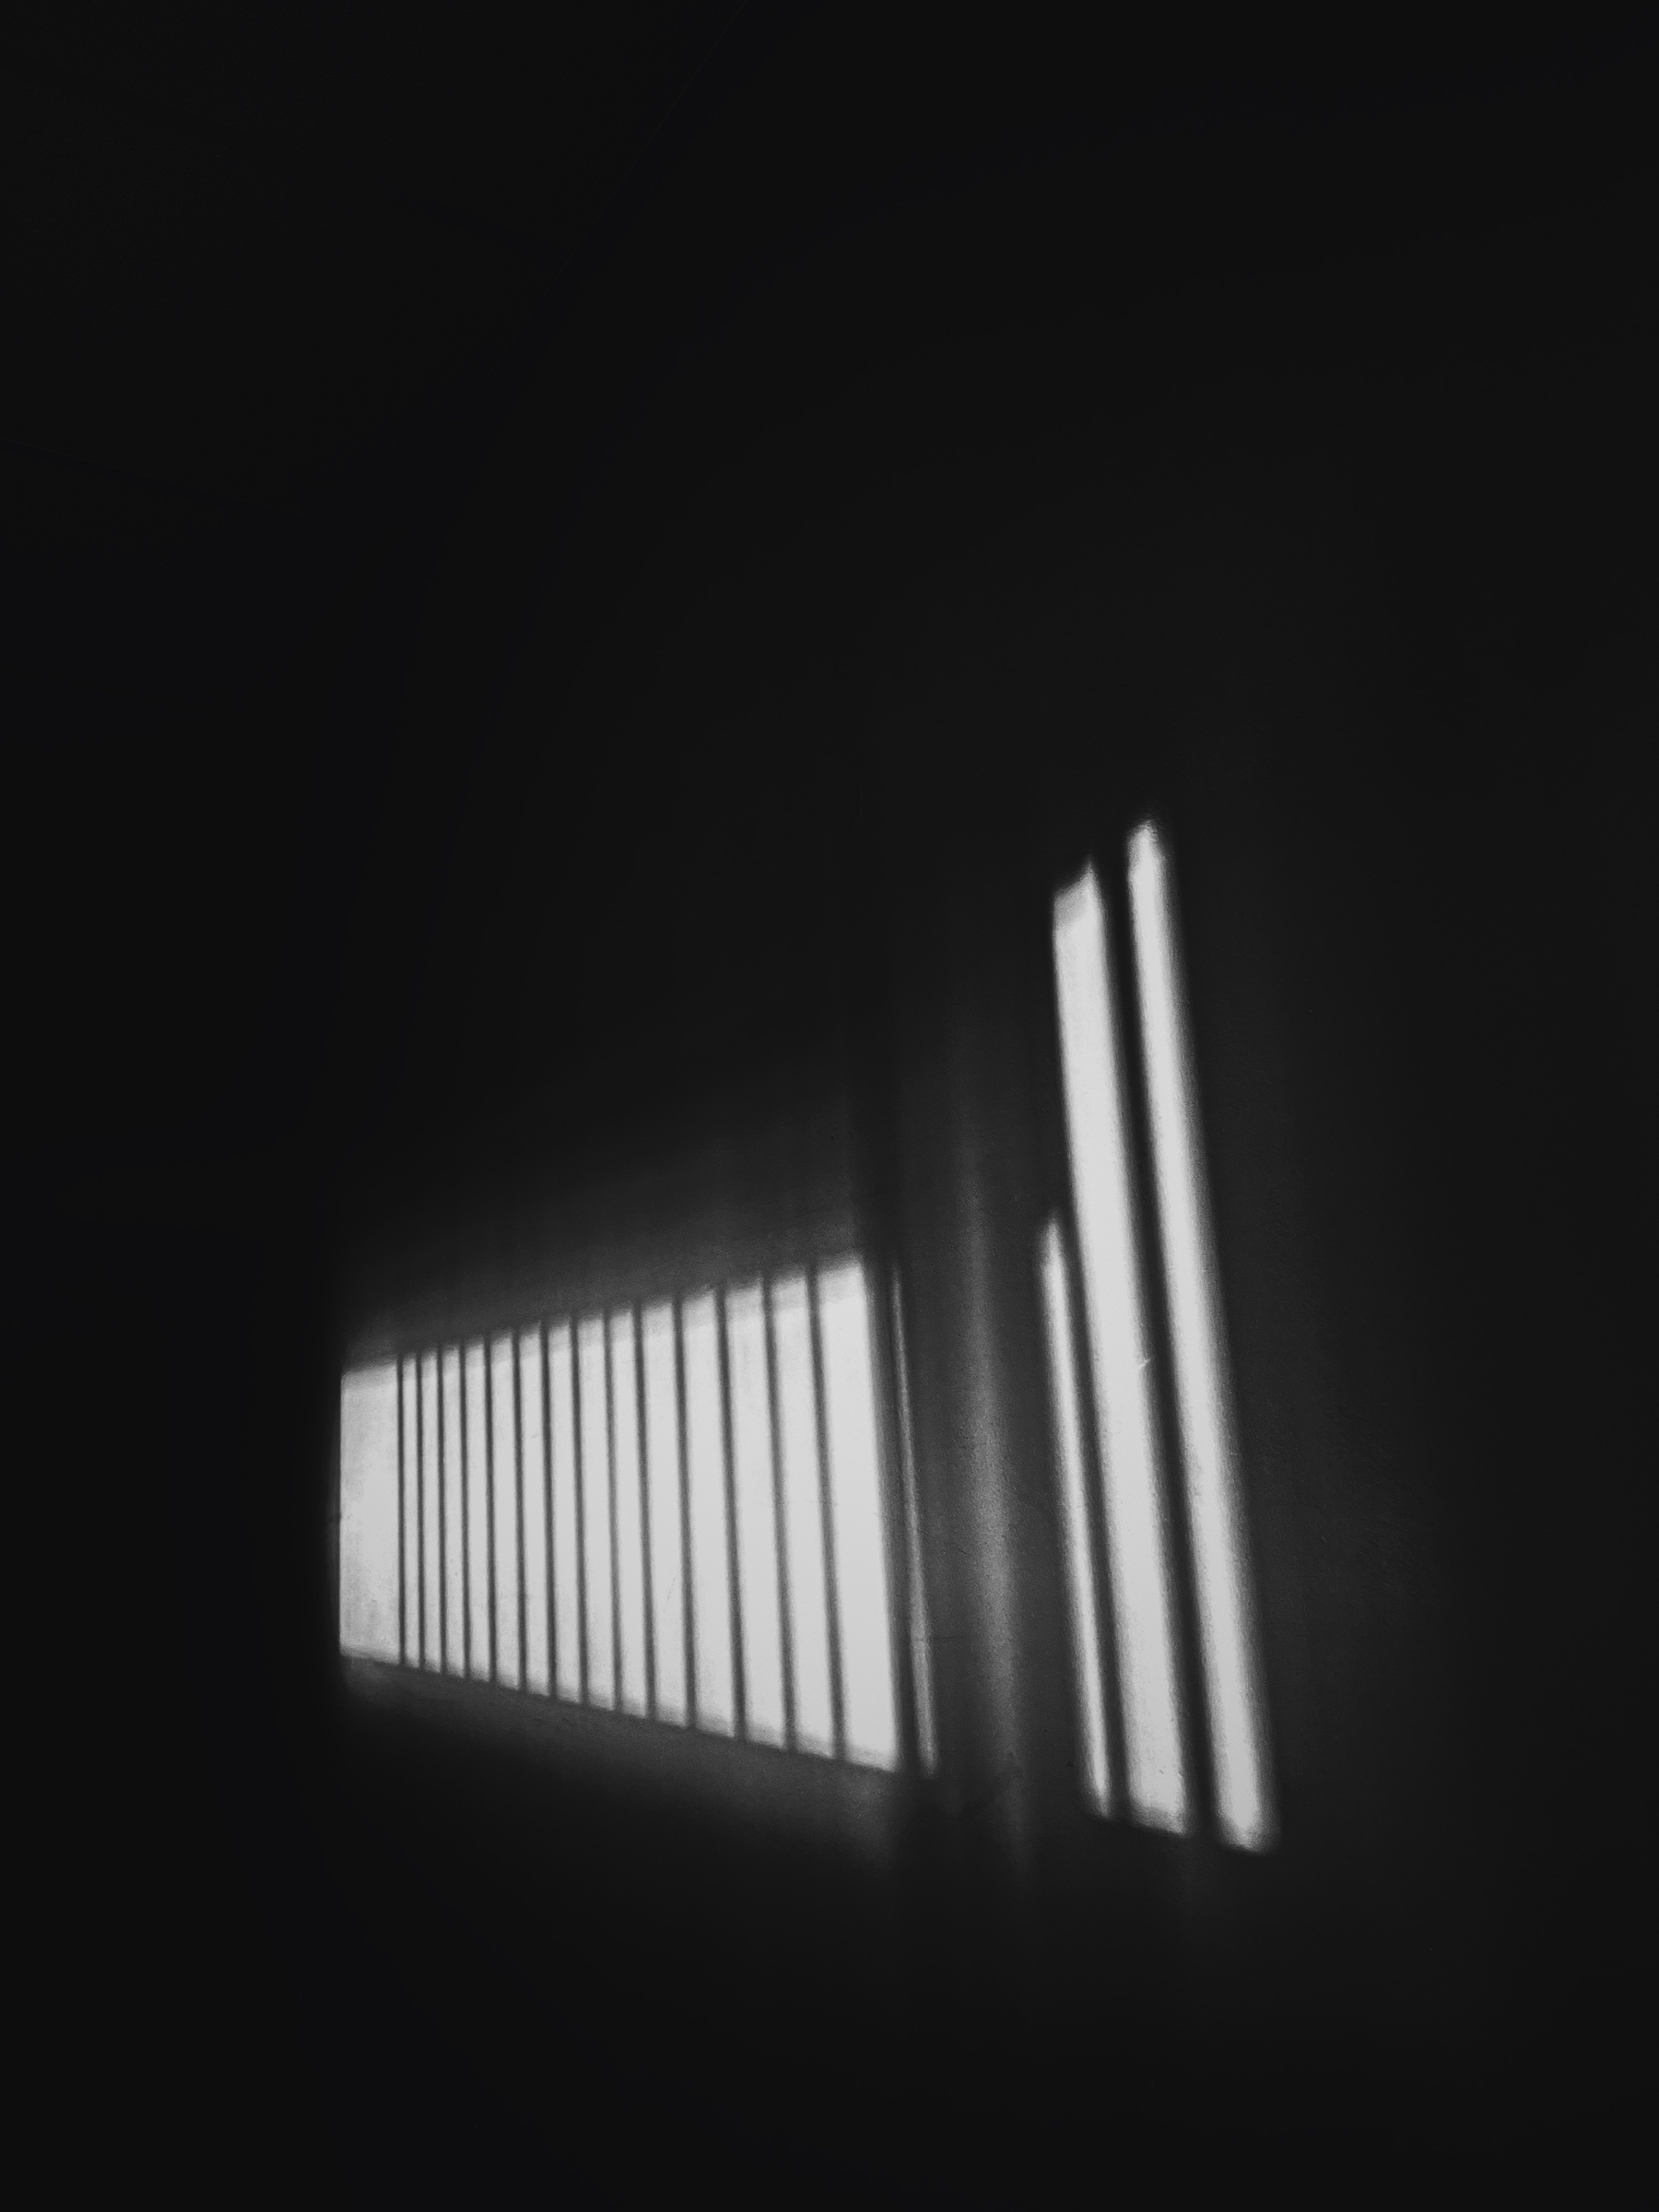 Photo: Capture inside my hallway with the early evening sun beaming through vertical blinds against the wall. The shot is black and white, with only the light visible and everything else darkened out.